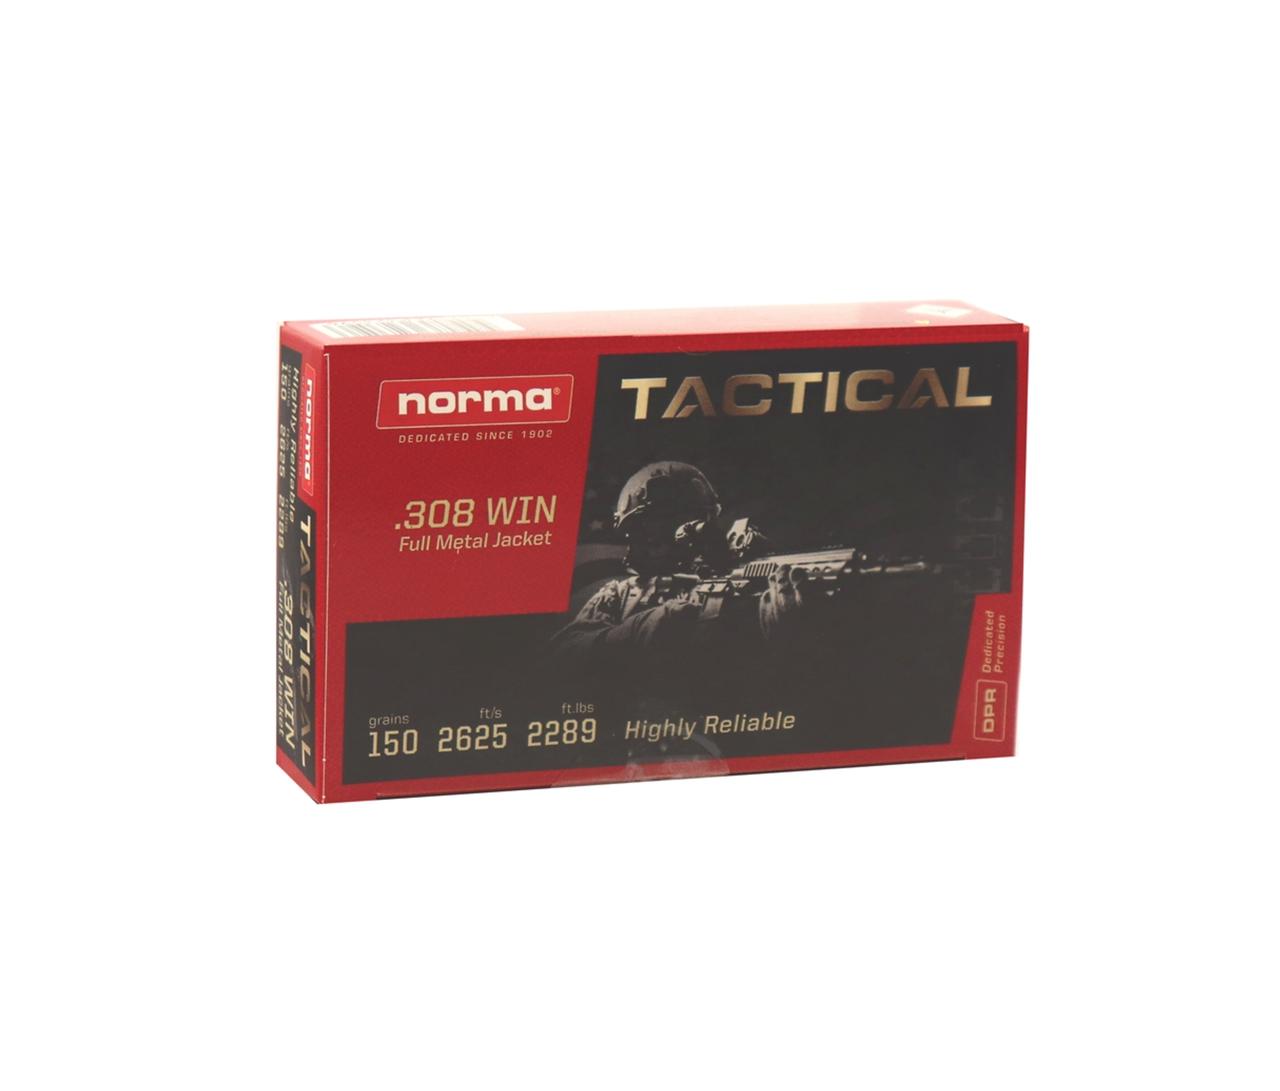  308 Win.Tactical 150gr Fmj 20rds